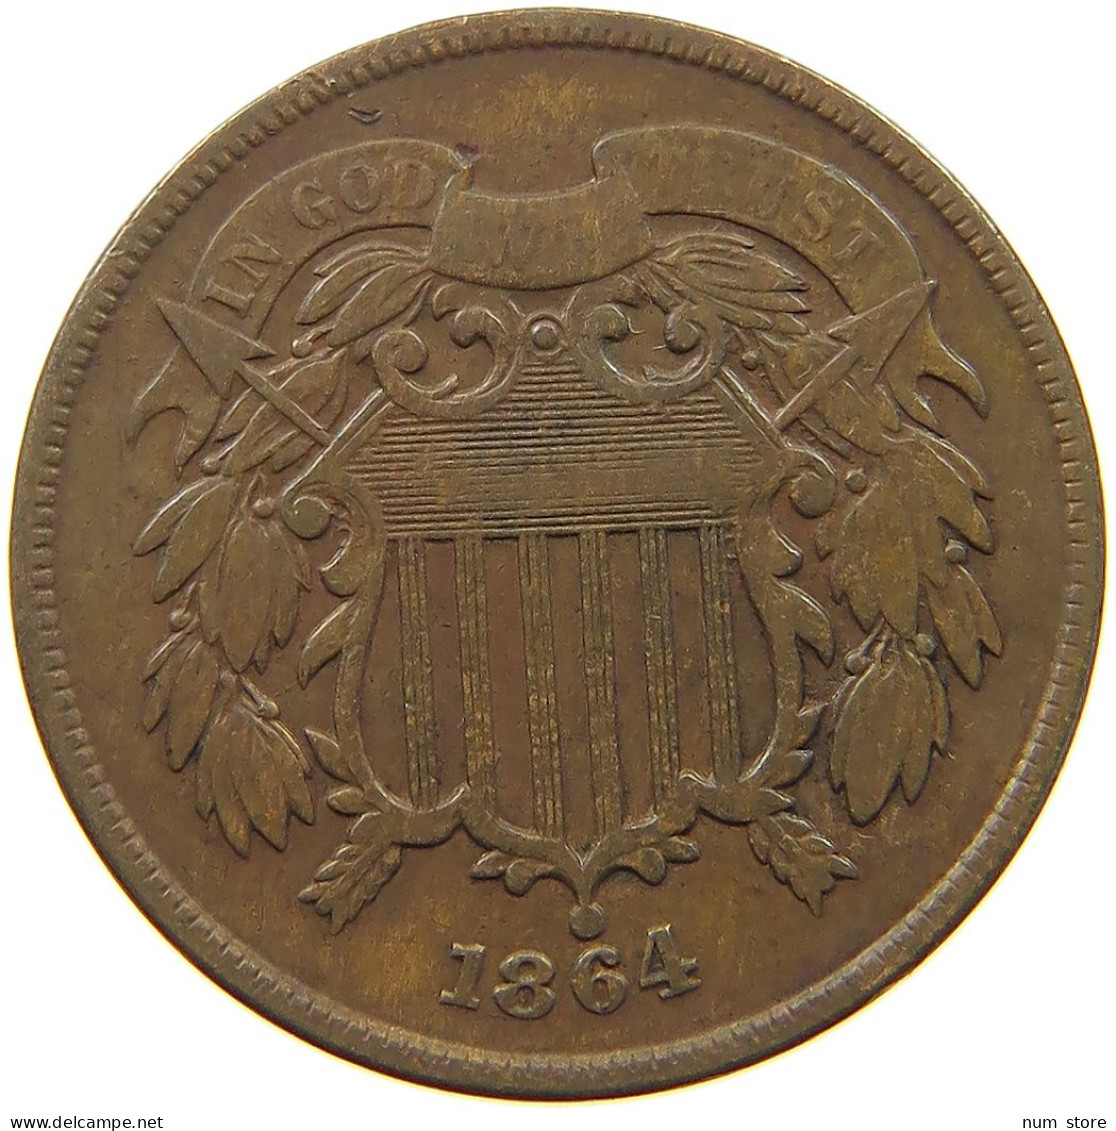 UNITED STATES OF AMERICA 2 CENTS 1864  #a011 0643 - 2, 3 & 20 Cents